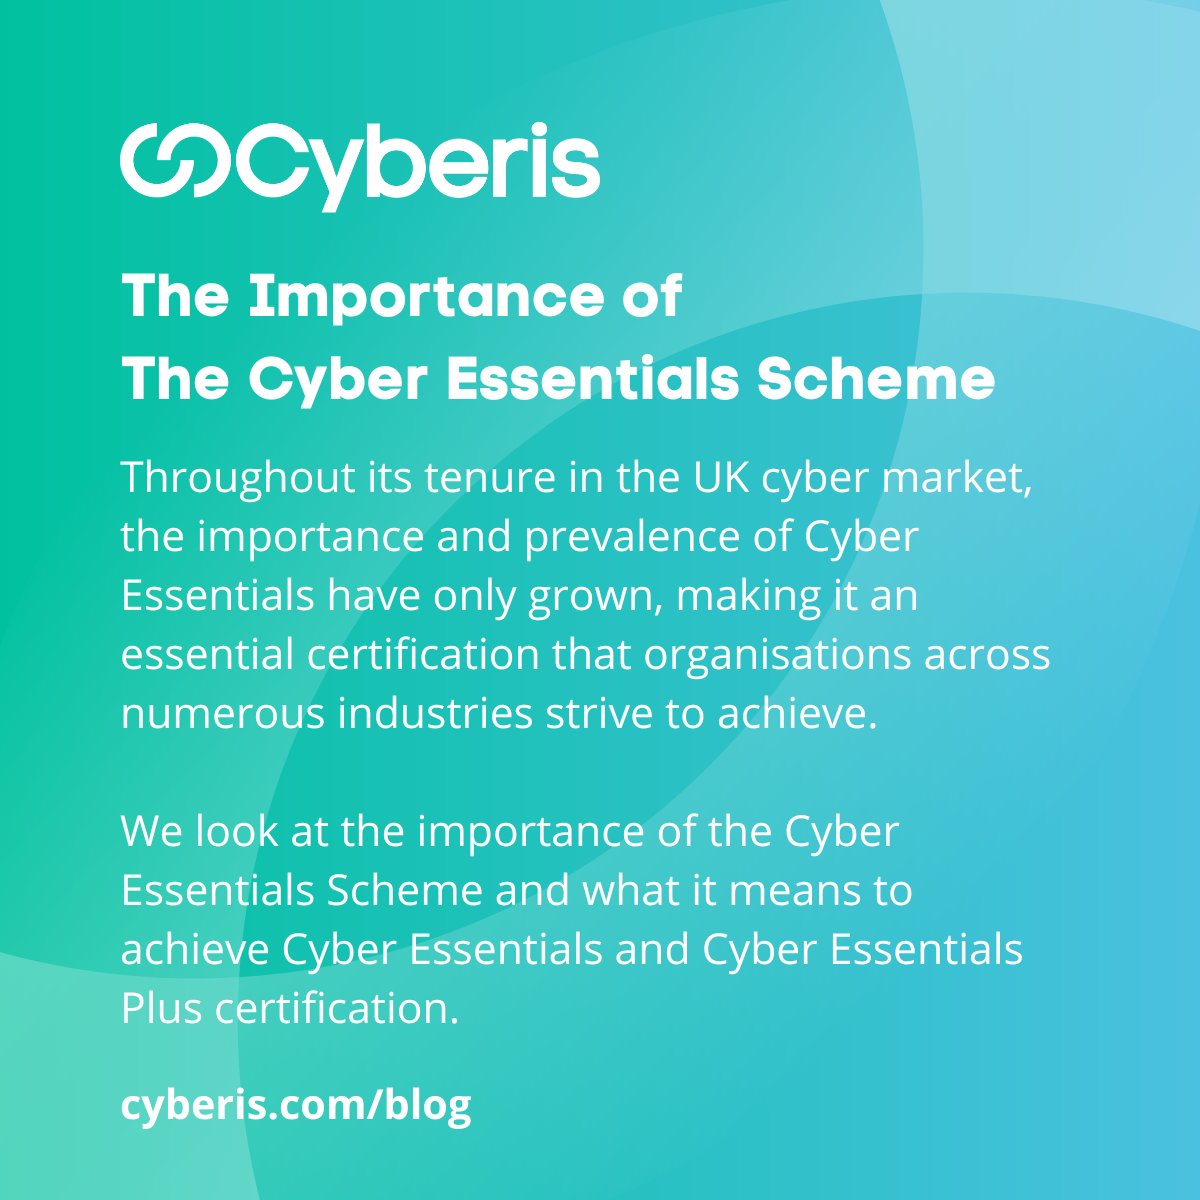 Cyber Essentials has a long history within the UK #cyber community. 

In our new blog, we explain the importance of the scheme and what it means to achieve #CyberEssentials and Cyber Essentials Plus certification. ✍️
cyberis.com/article/import…

@CyberEssentials